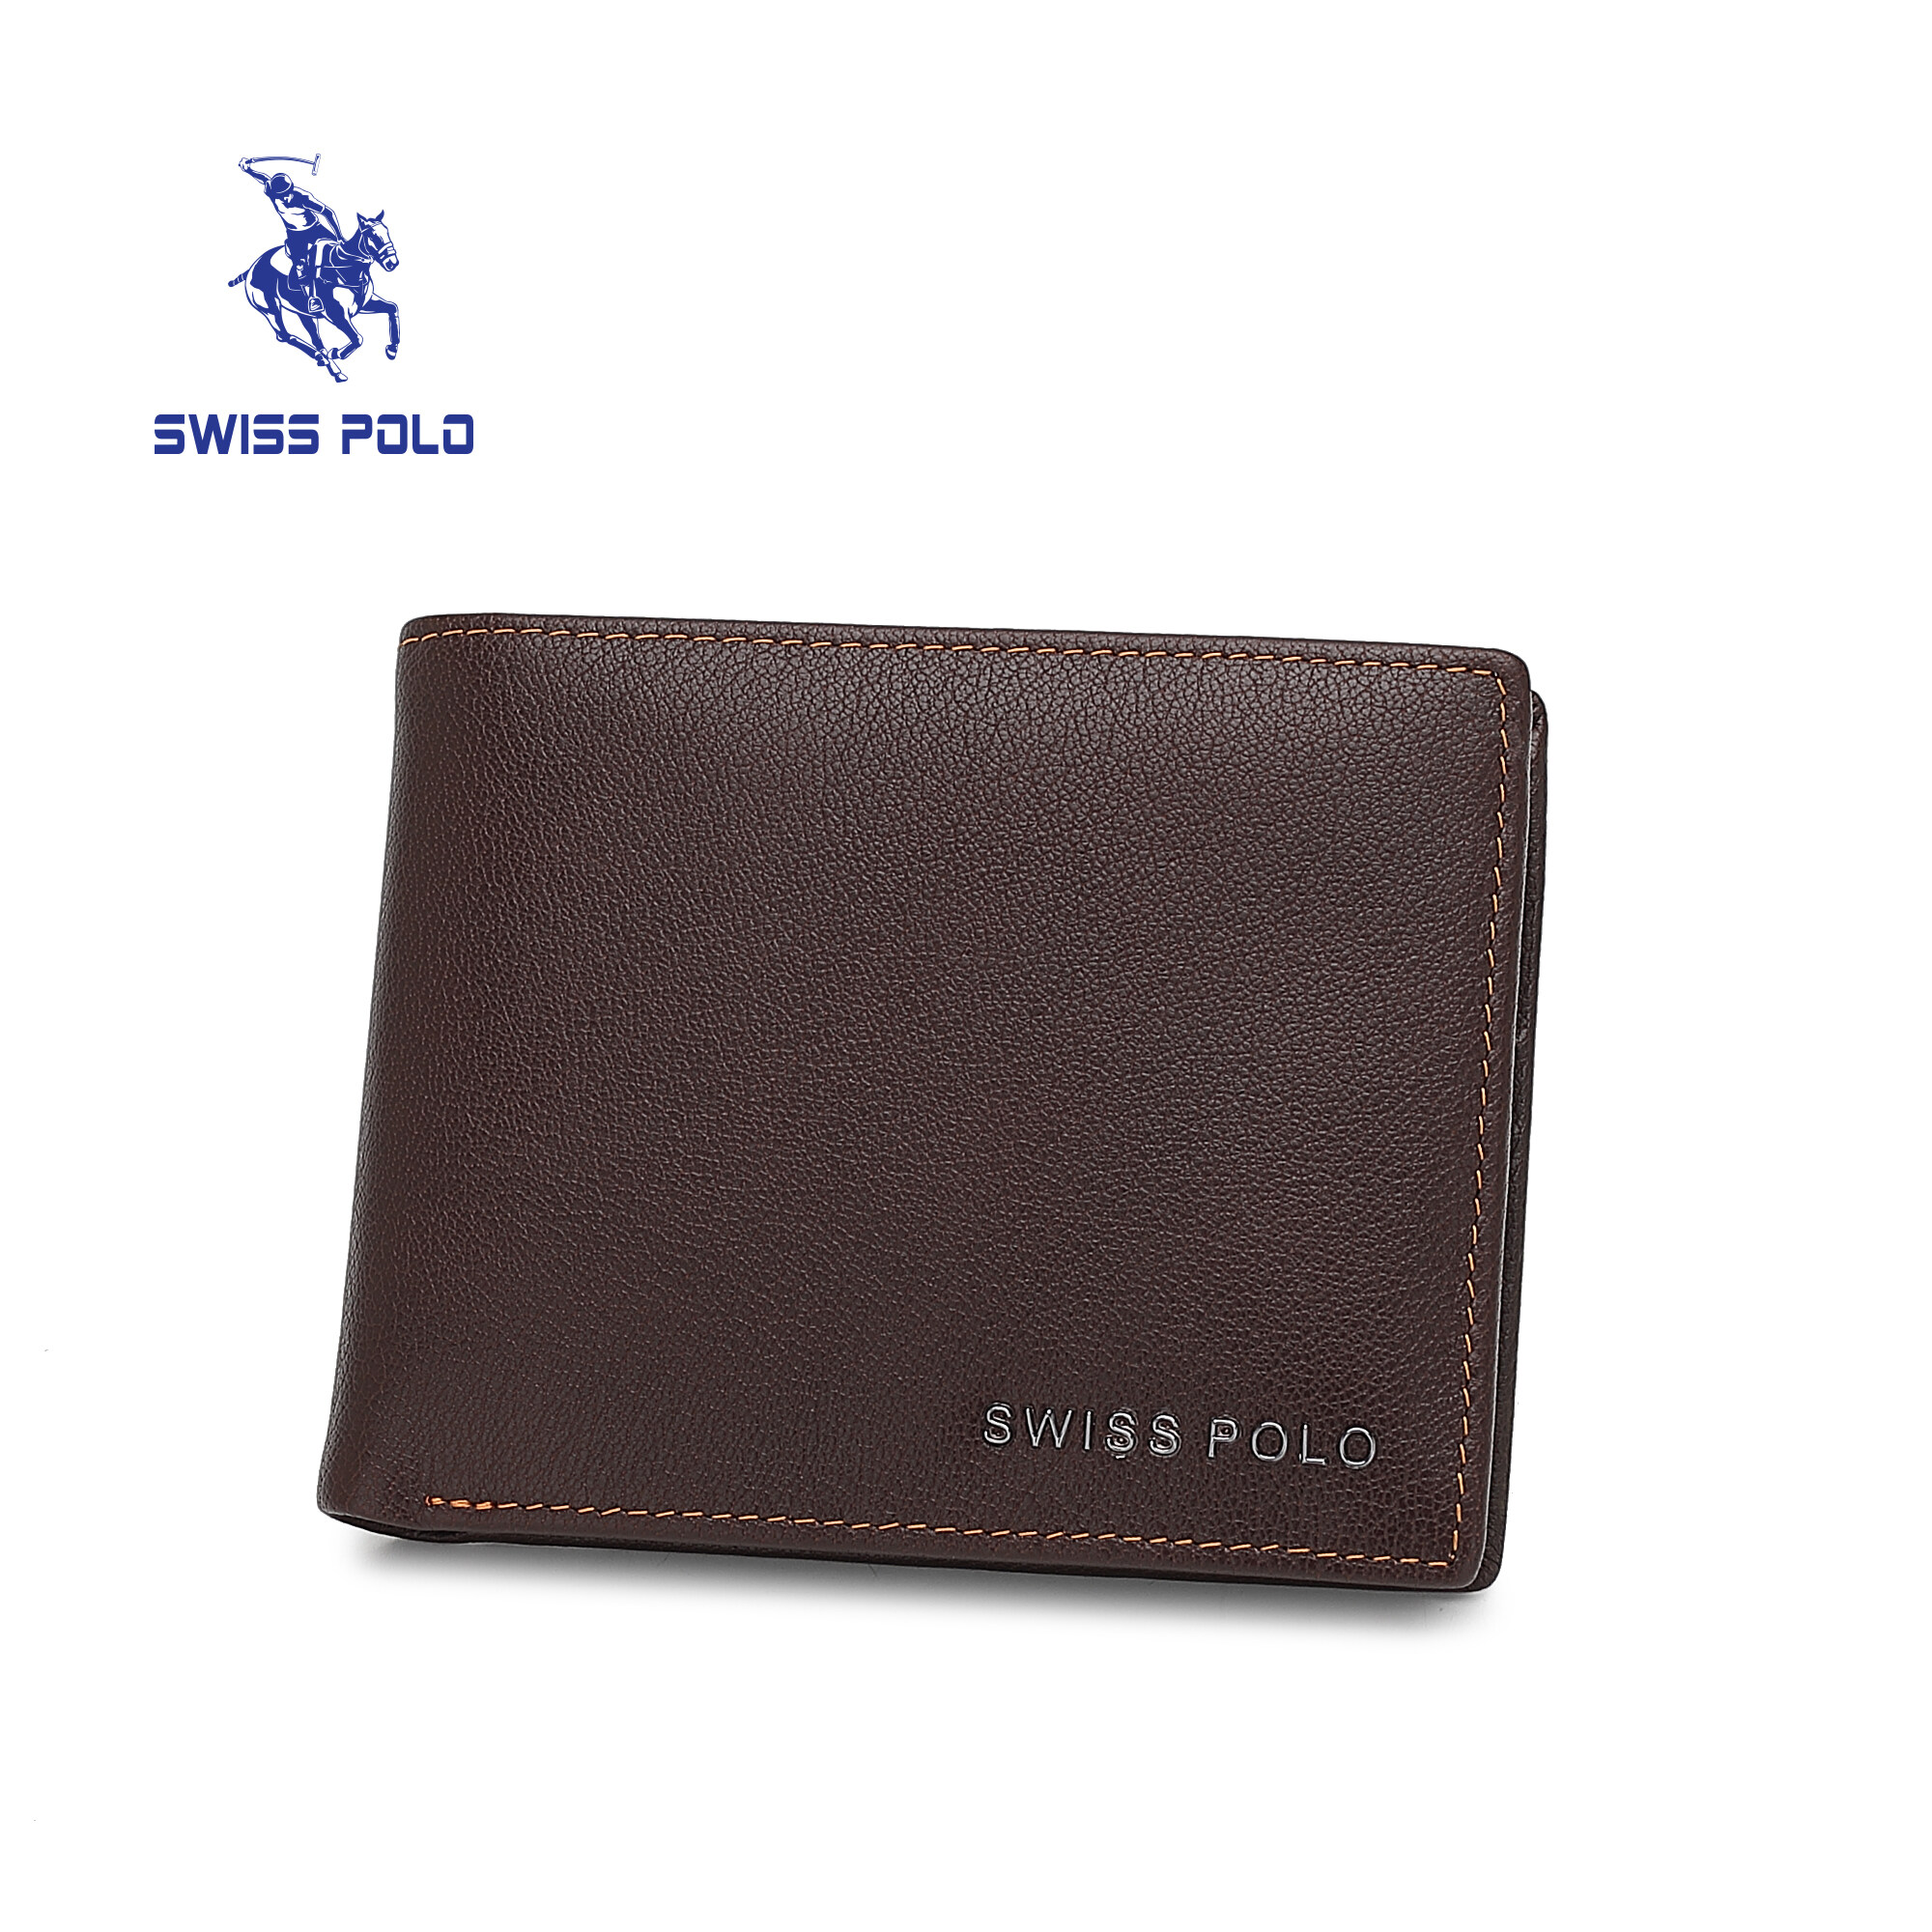 SWISS POLO Genuine Leather RFID Short Wallet SW 194-2 BROWN